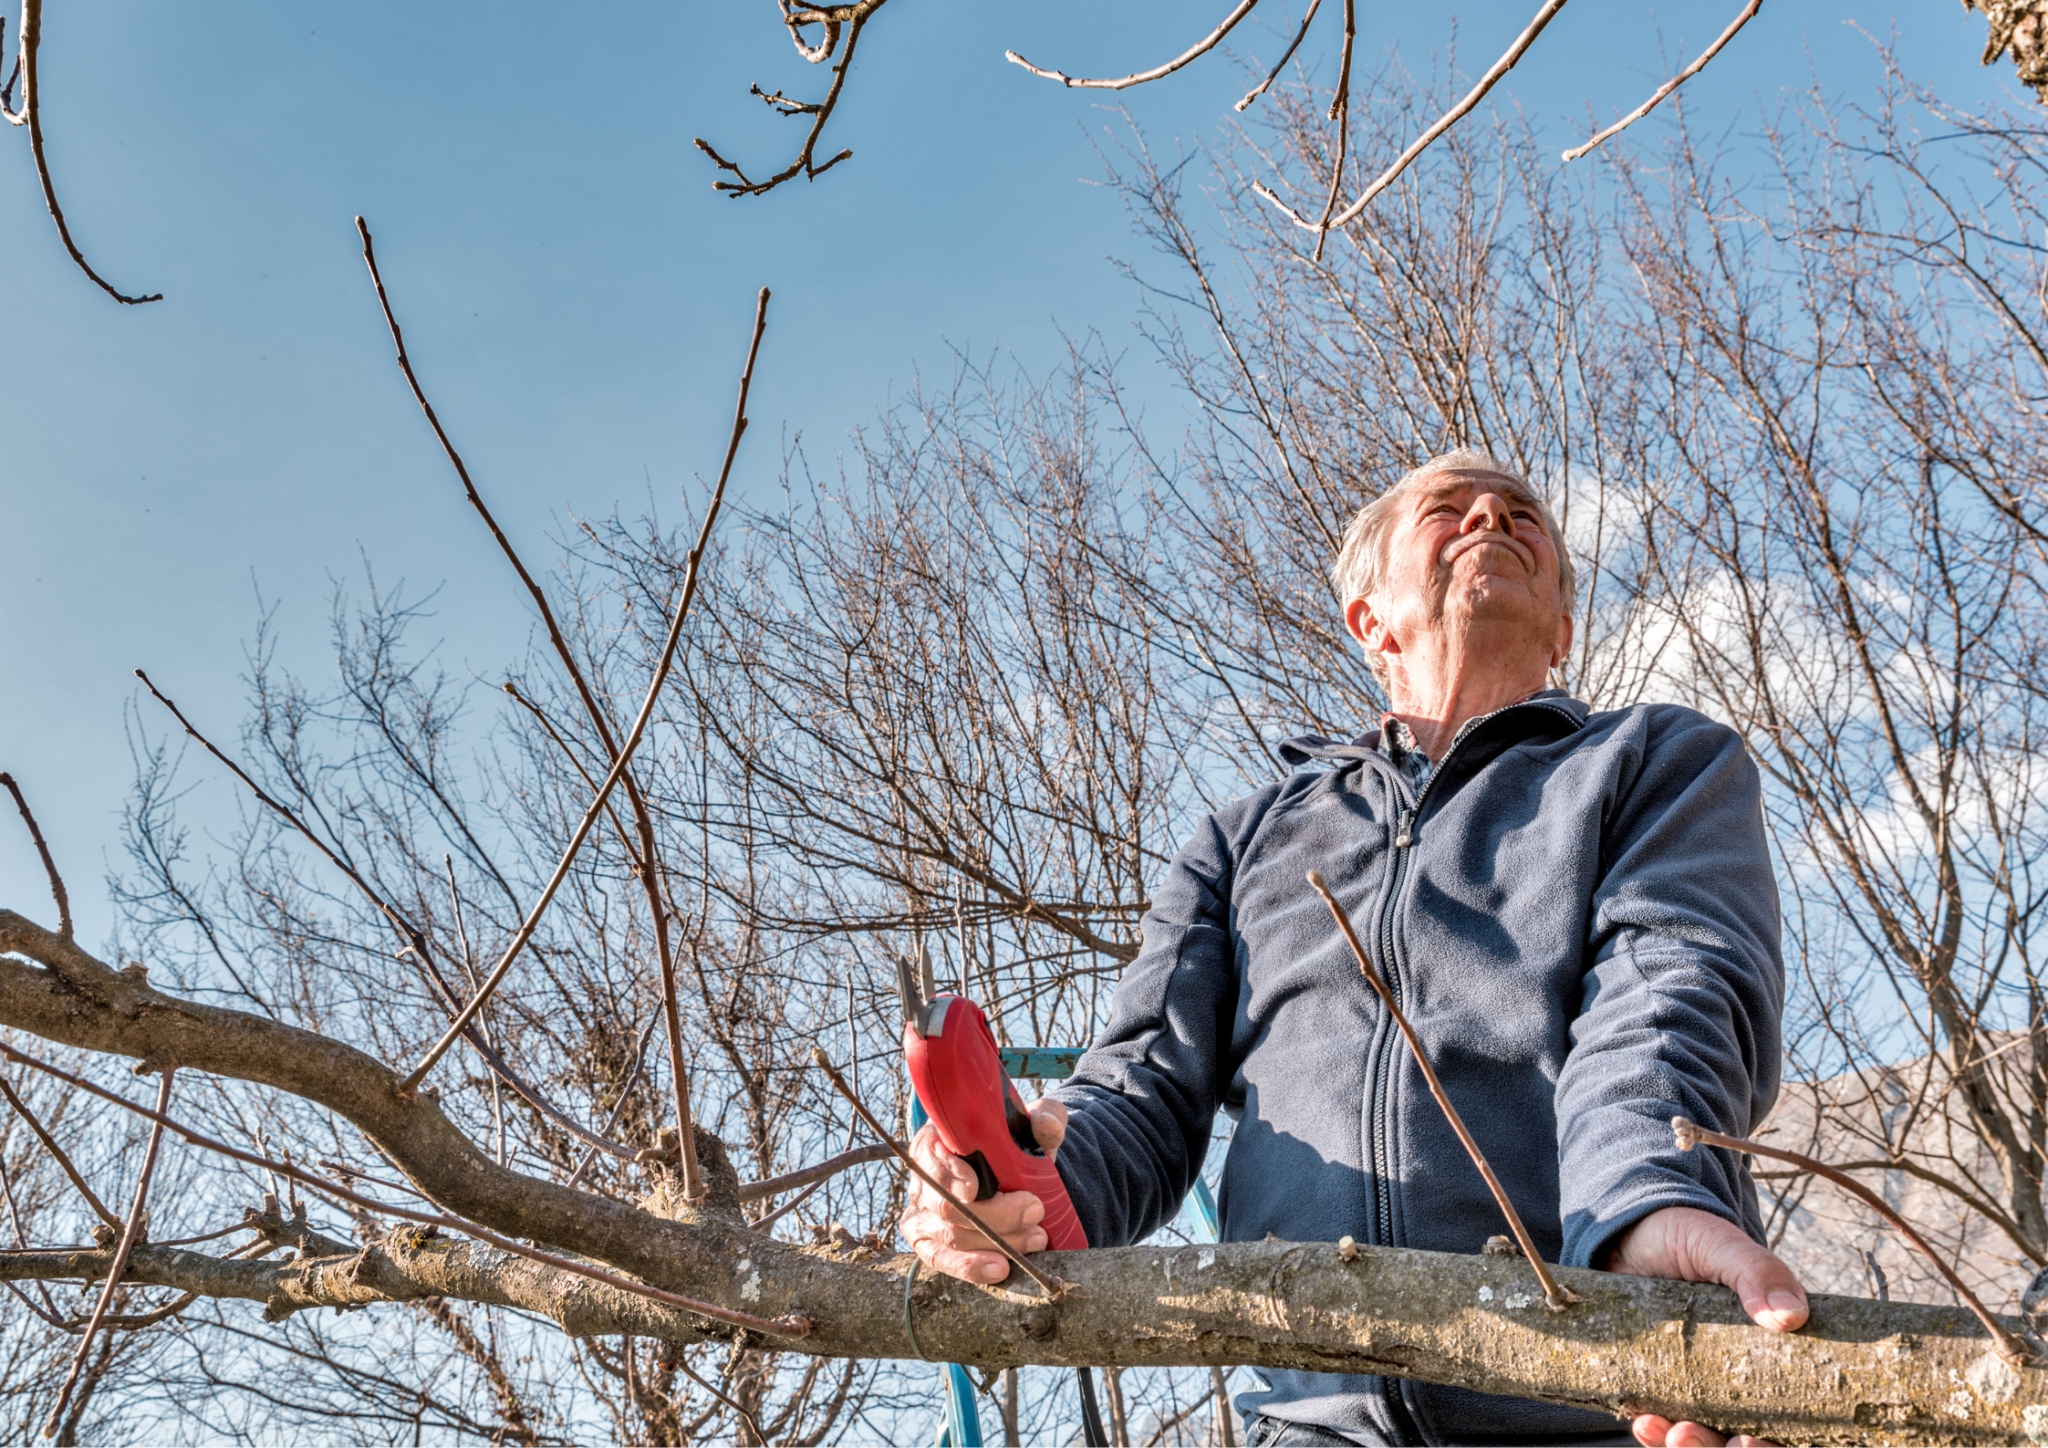 High-quality electric pruning shears work efficiently, allowing you to complete your pruning tasks in a fraction of the time it would take with manual tools.